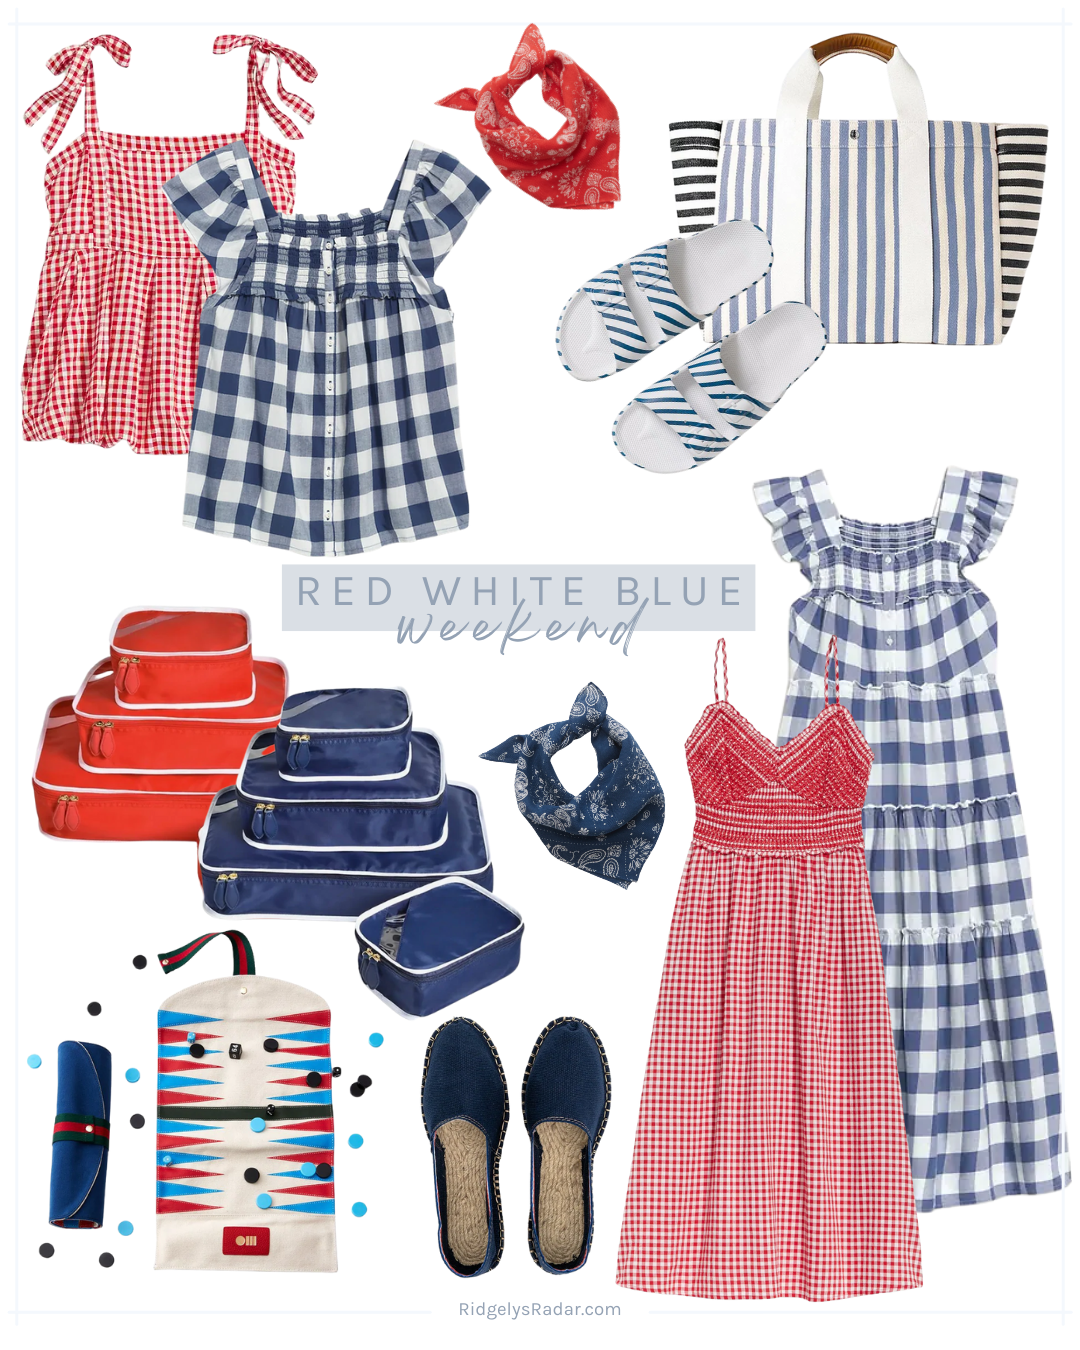 Nothing says Holiday more than red white and blue for July 4th! Gingham, stripes, checks.. I got you covered. Come shop with me!